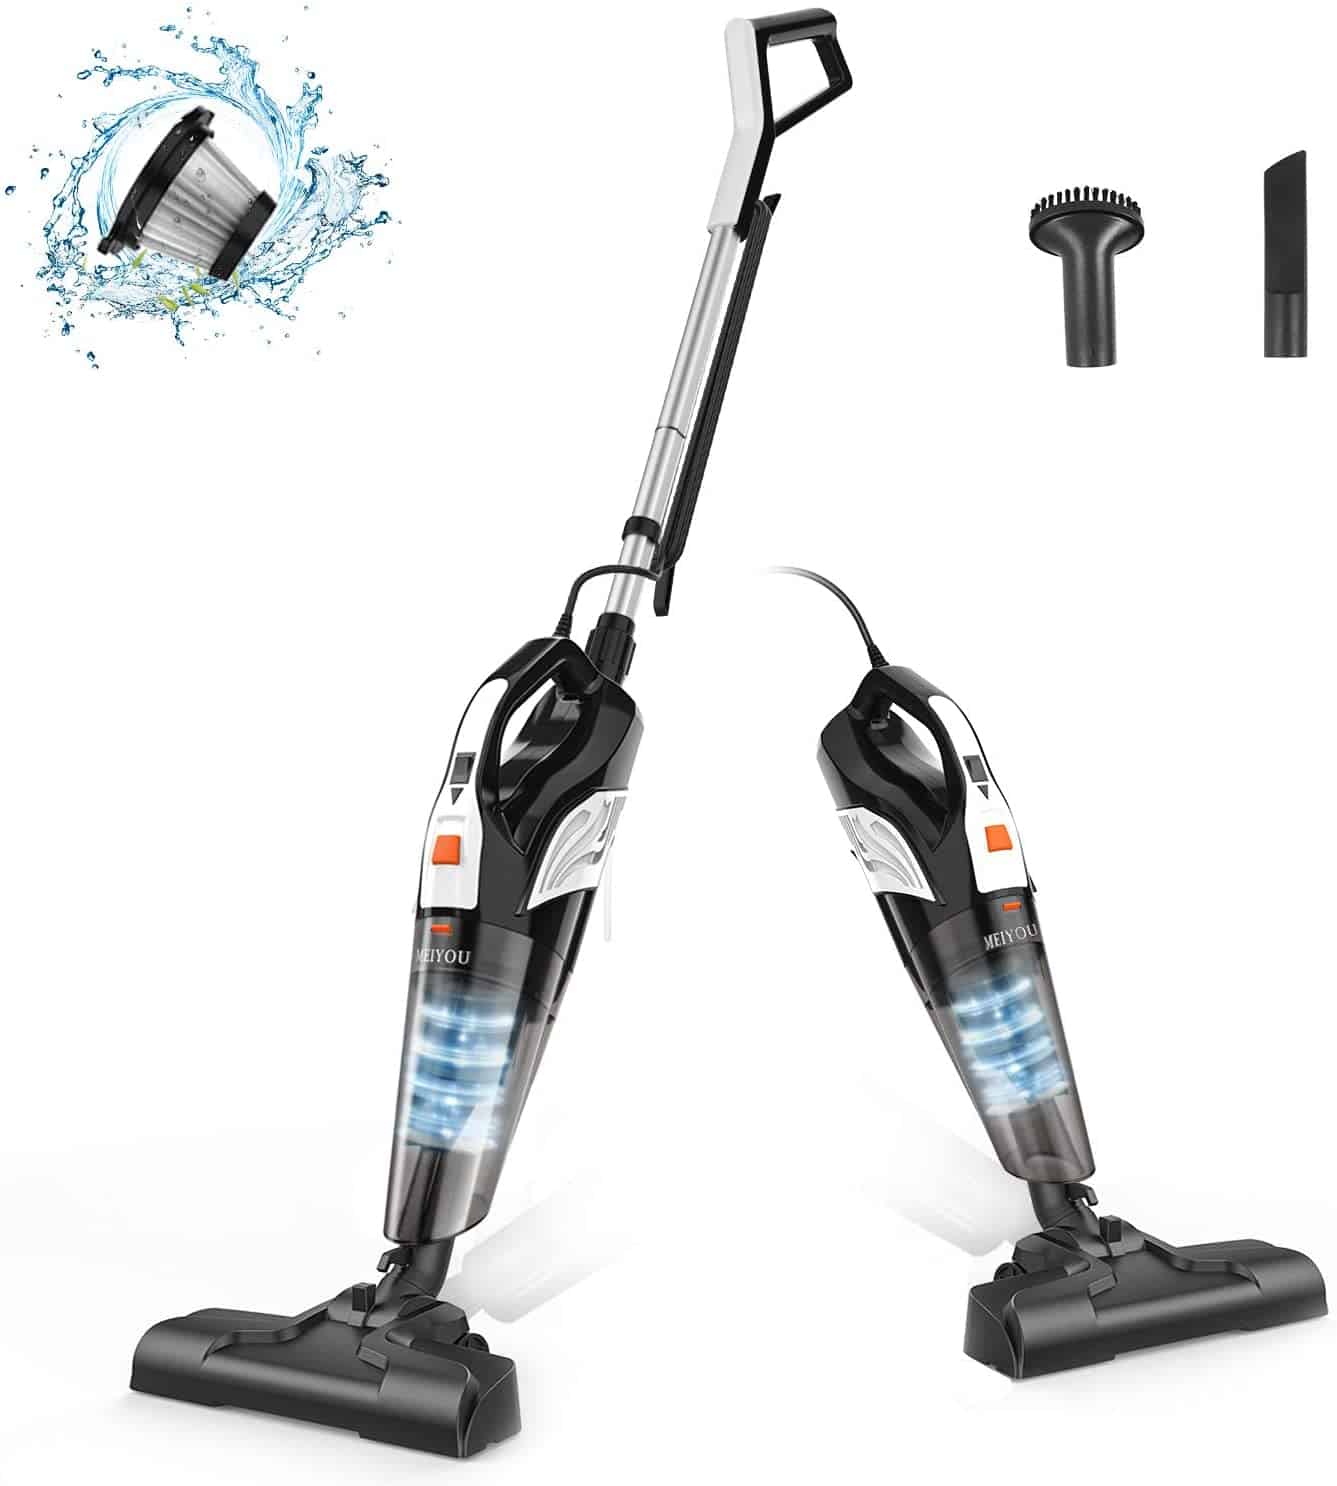 Meiyou corded stick vacuum cleaner